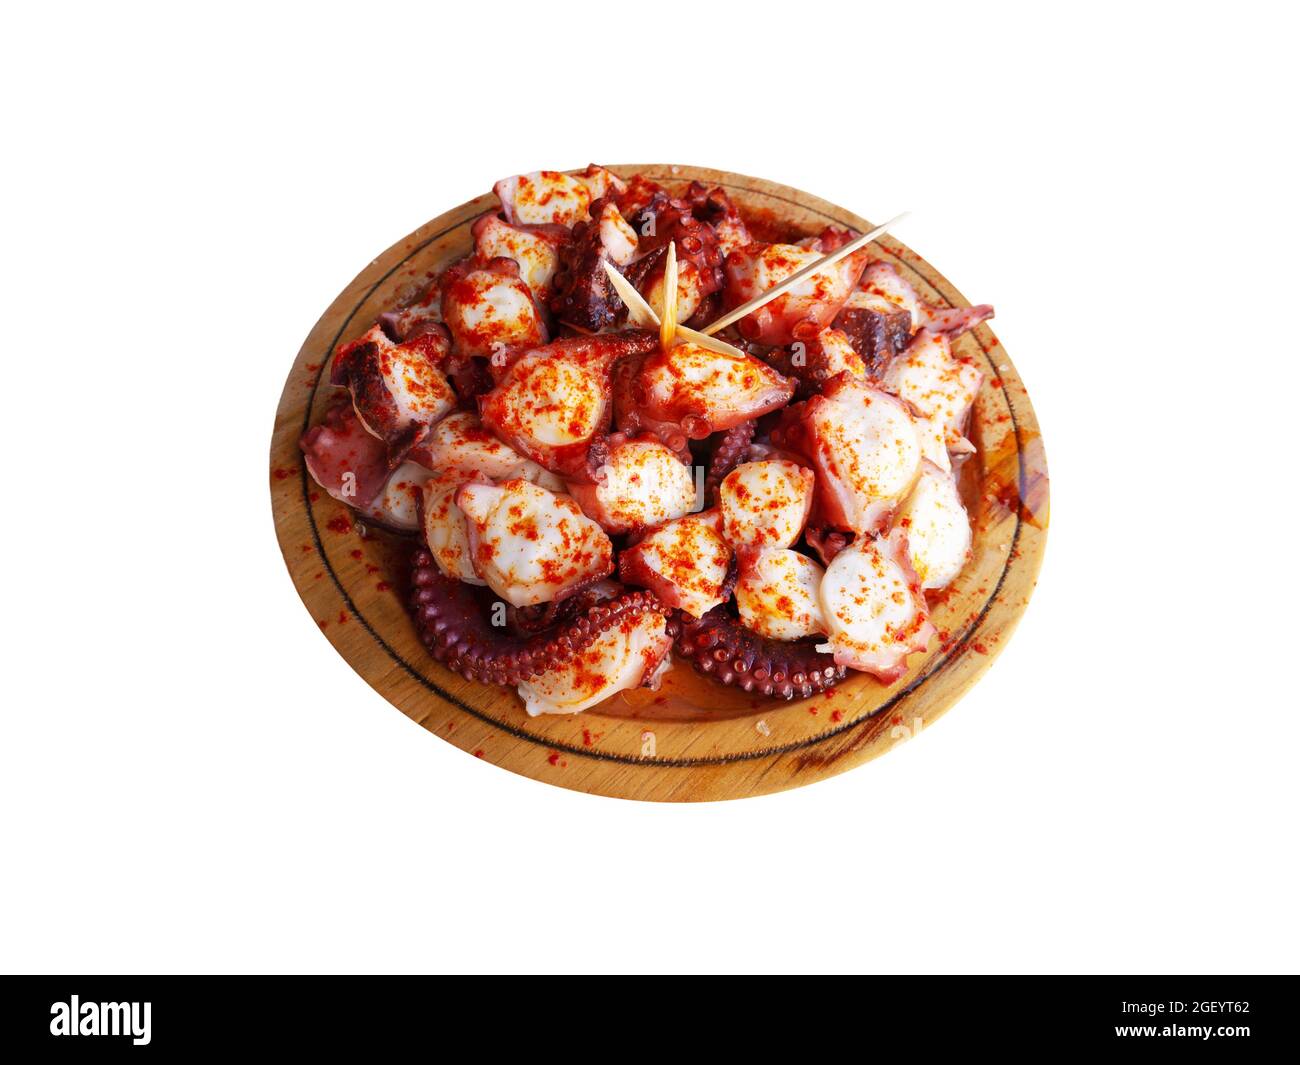 Pulpo a la gallega in Spanish meaning Galician-style octopus or polbo a feira meaning fair-style octopus in gallego. Isolated on white. Stock Photo